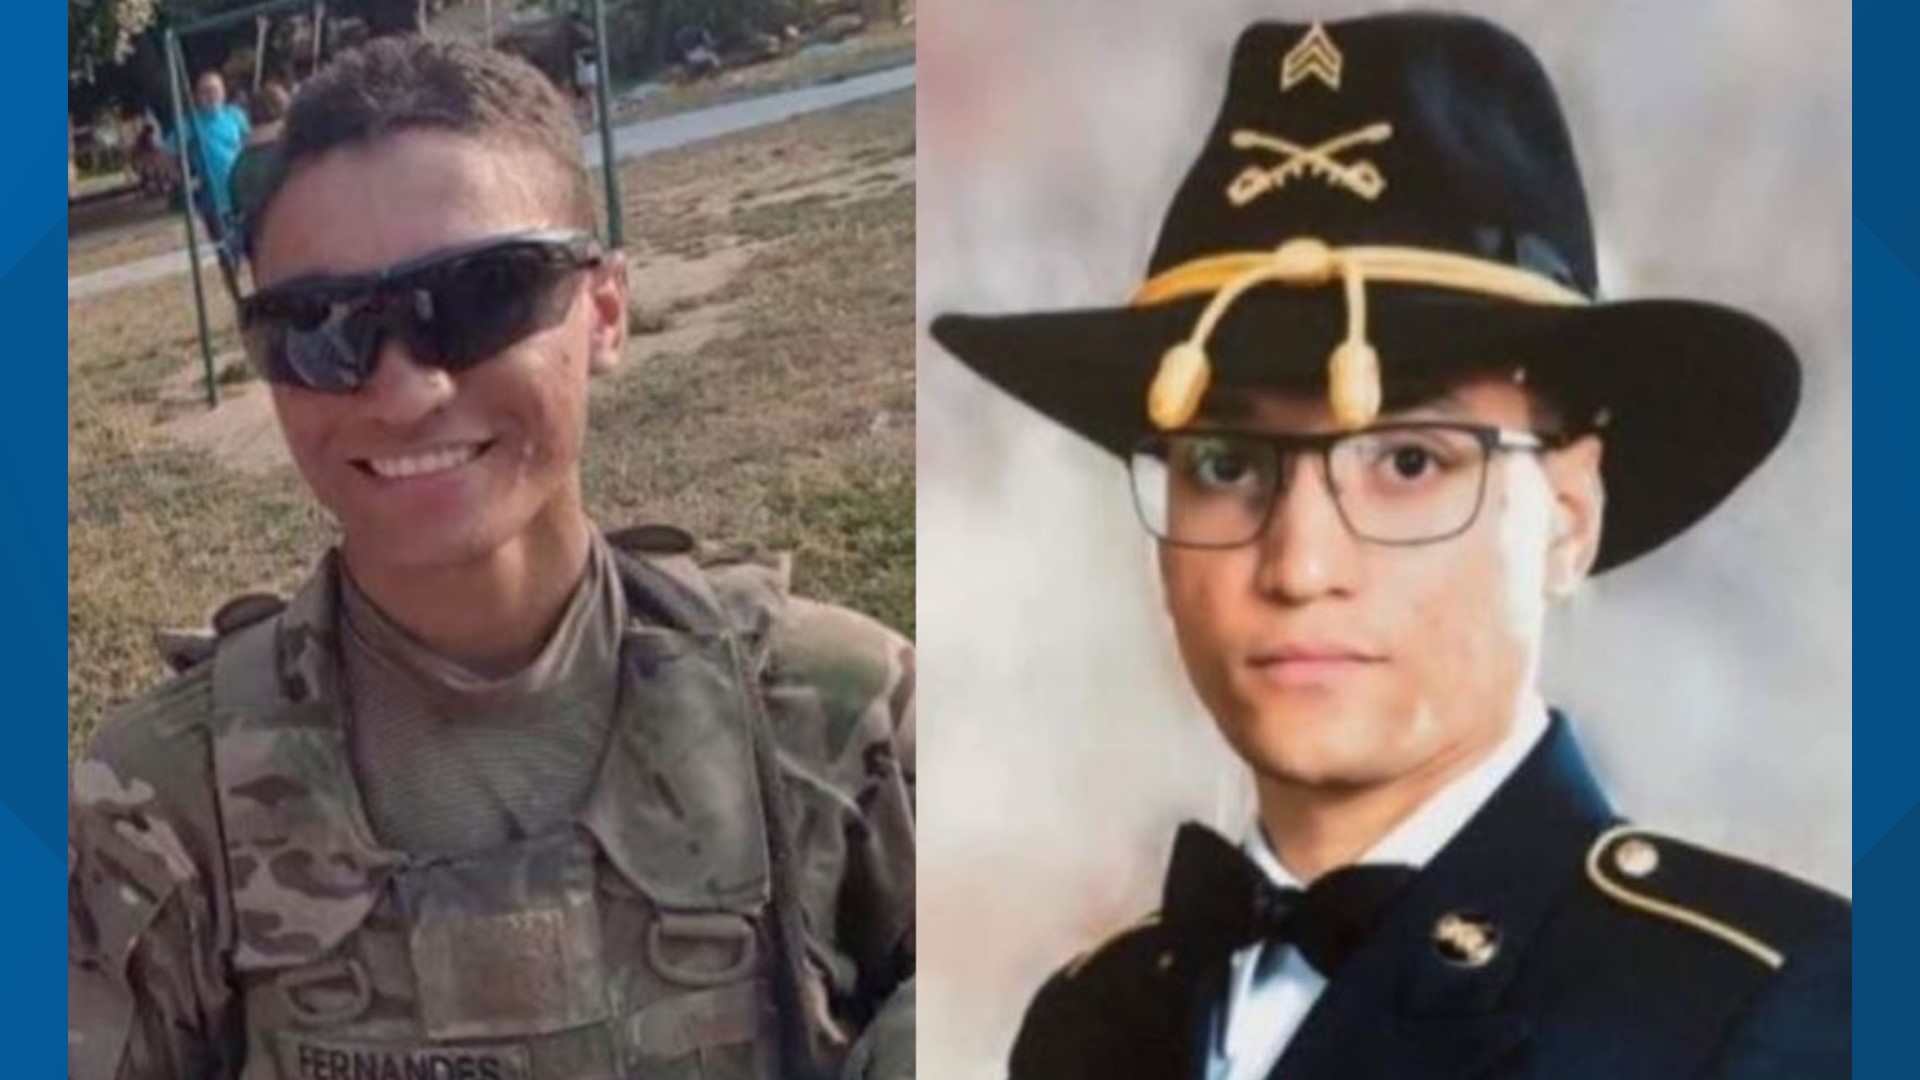 Family members of missing Fort Hood soldier Elder Fernandes met with post officials Sunday again as both parties continue searching for the missing sergeant.